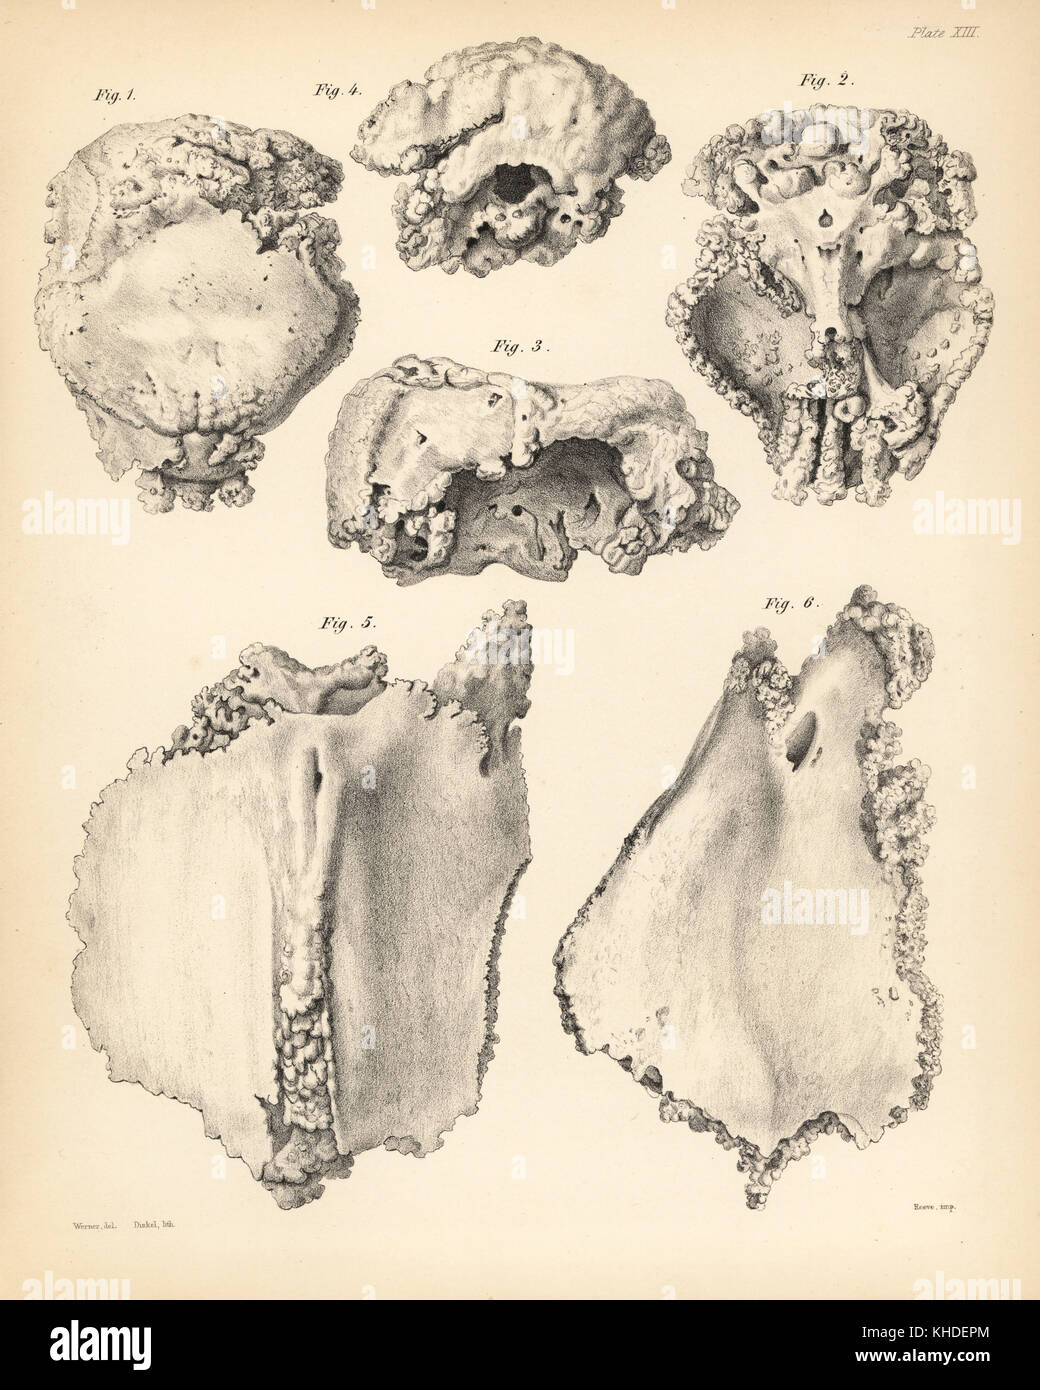 Cranium 1-4 and part of sternum 5,6 of the extinct Rodrigues solitaire, Pezophaps solitaria, in the Parisian Collection. Lithograph by Joseph Dinkel after Werner from Hugh Edwin Strickland and Alexander Gordon Melville's The Dodo and its Kindred, London, Reeve, Benham and Reeve, 1848. Stock Photo